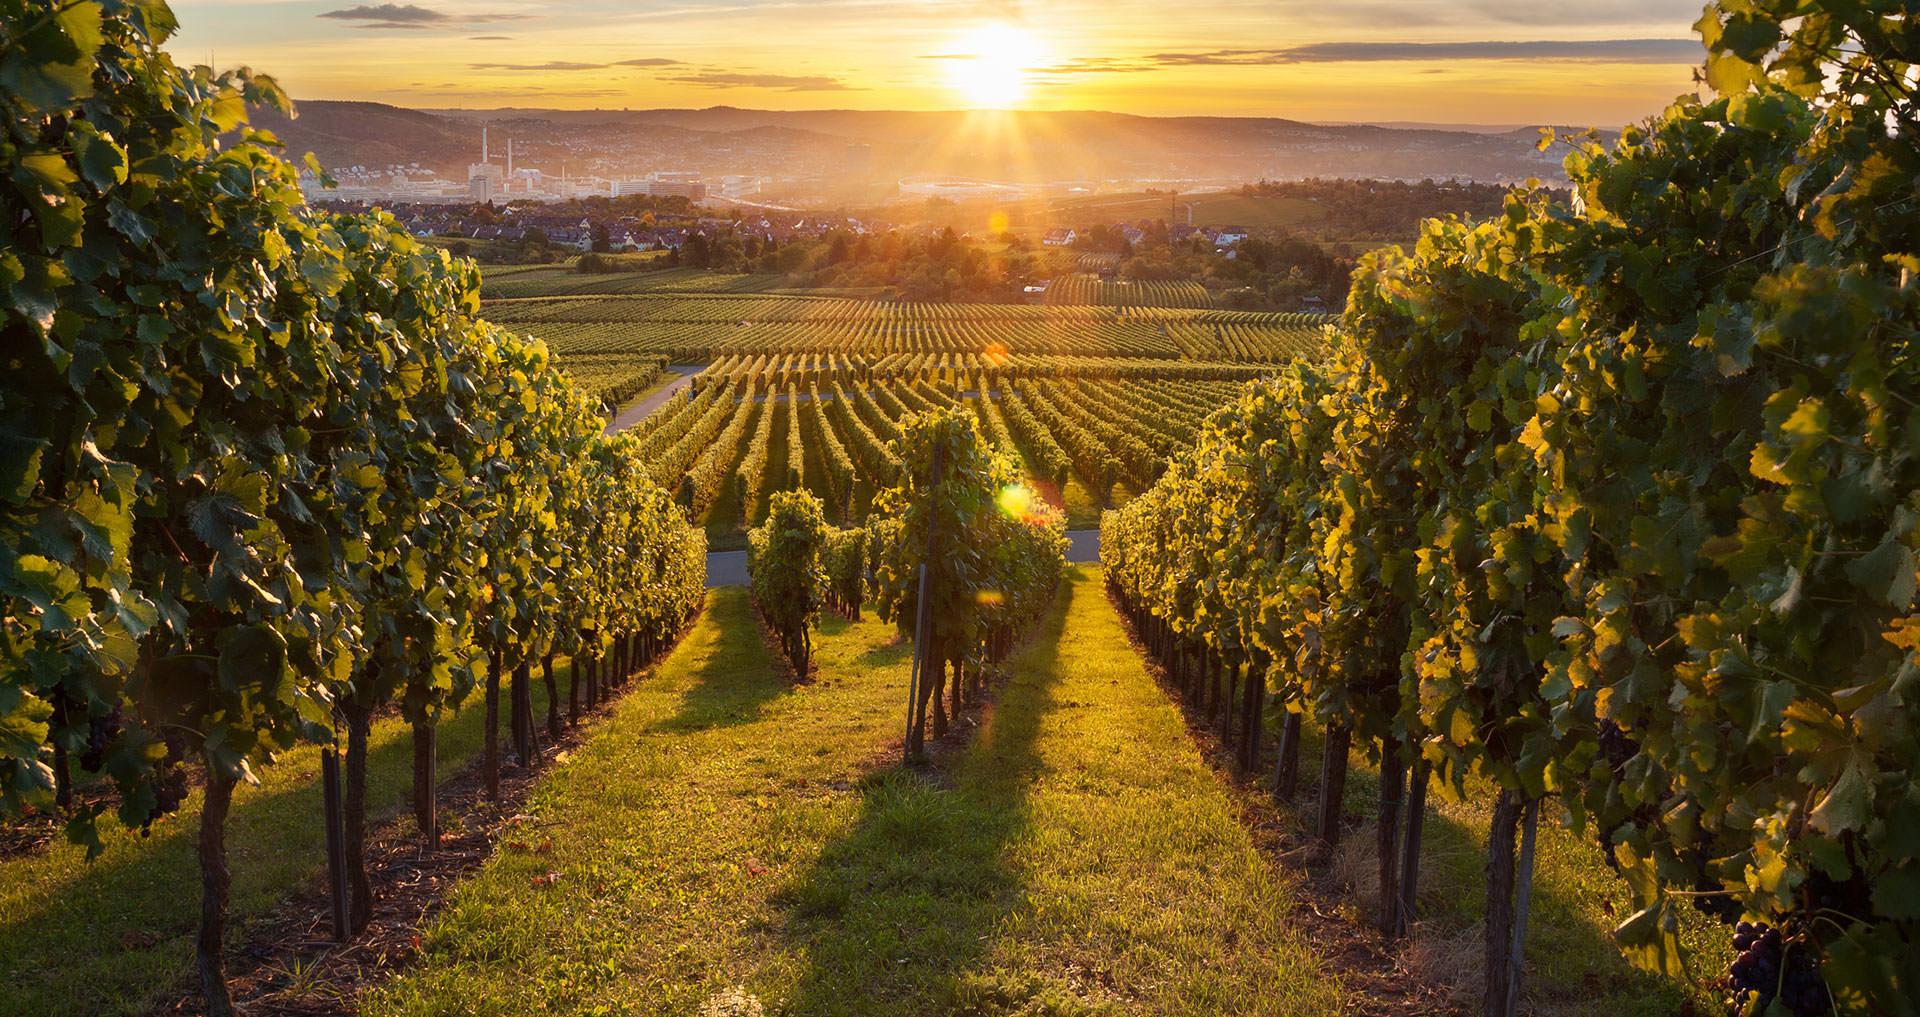 The World’s Longest-Running Winery Can Be Found in Germany